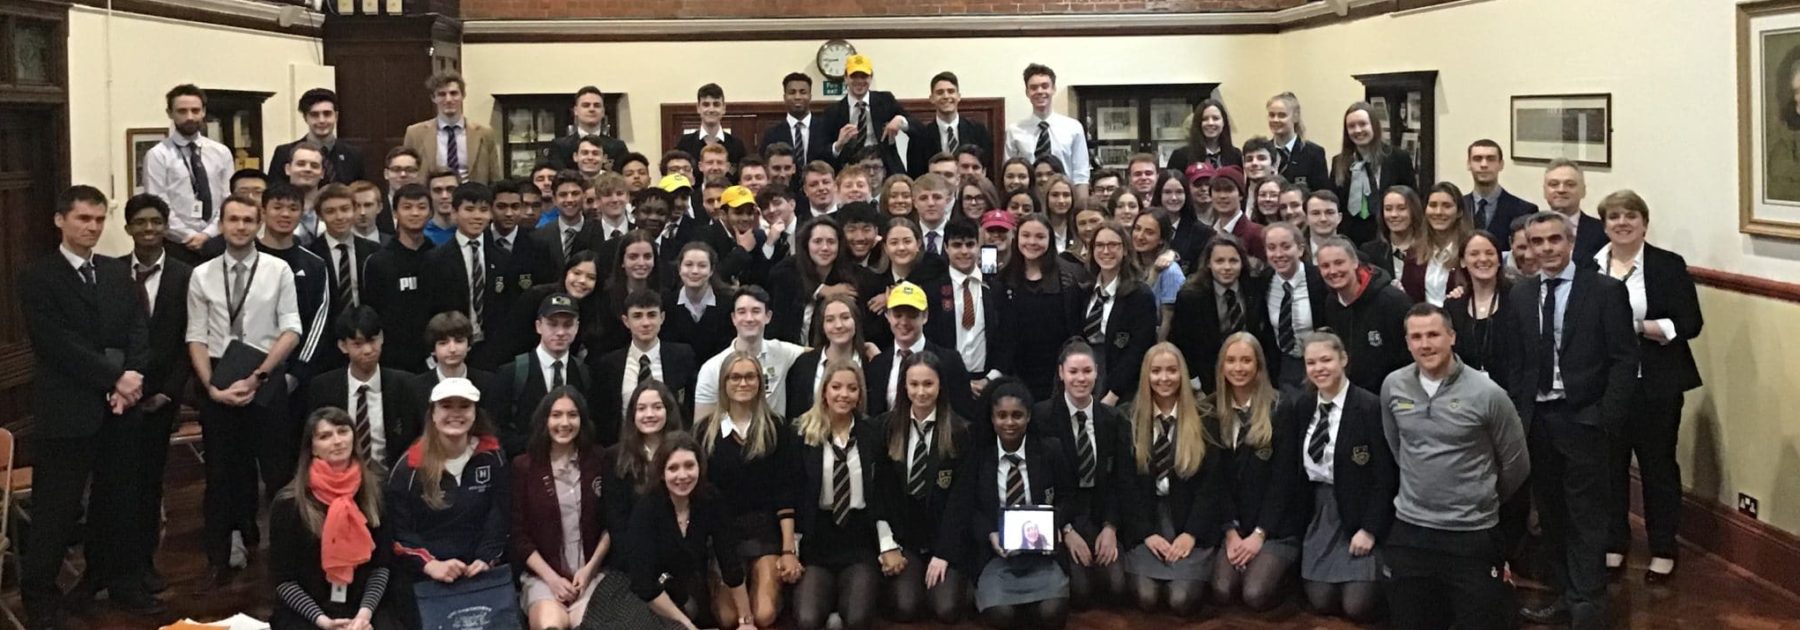 Hats Off to our Upper Sixth Form!